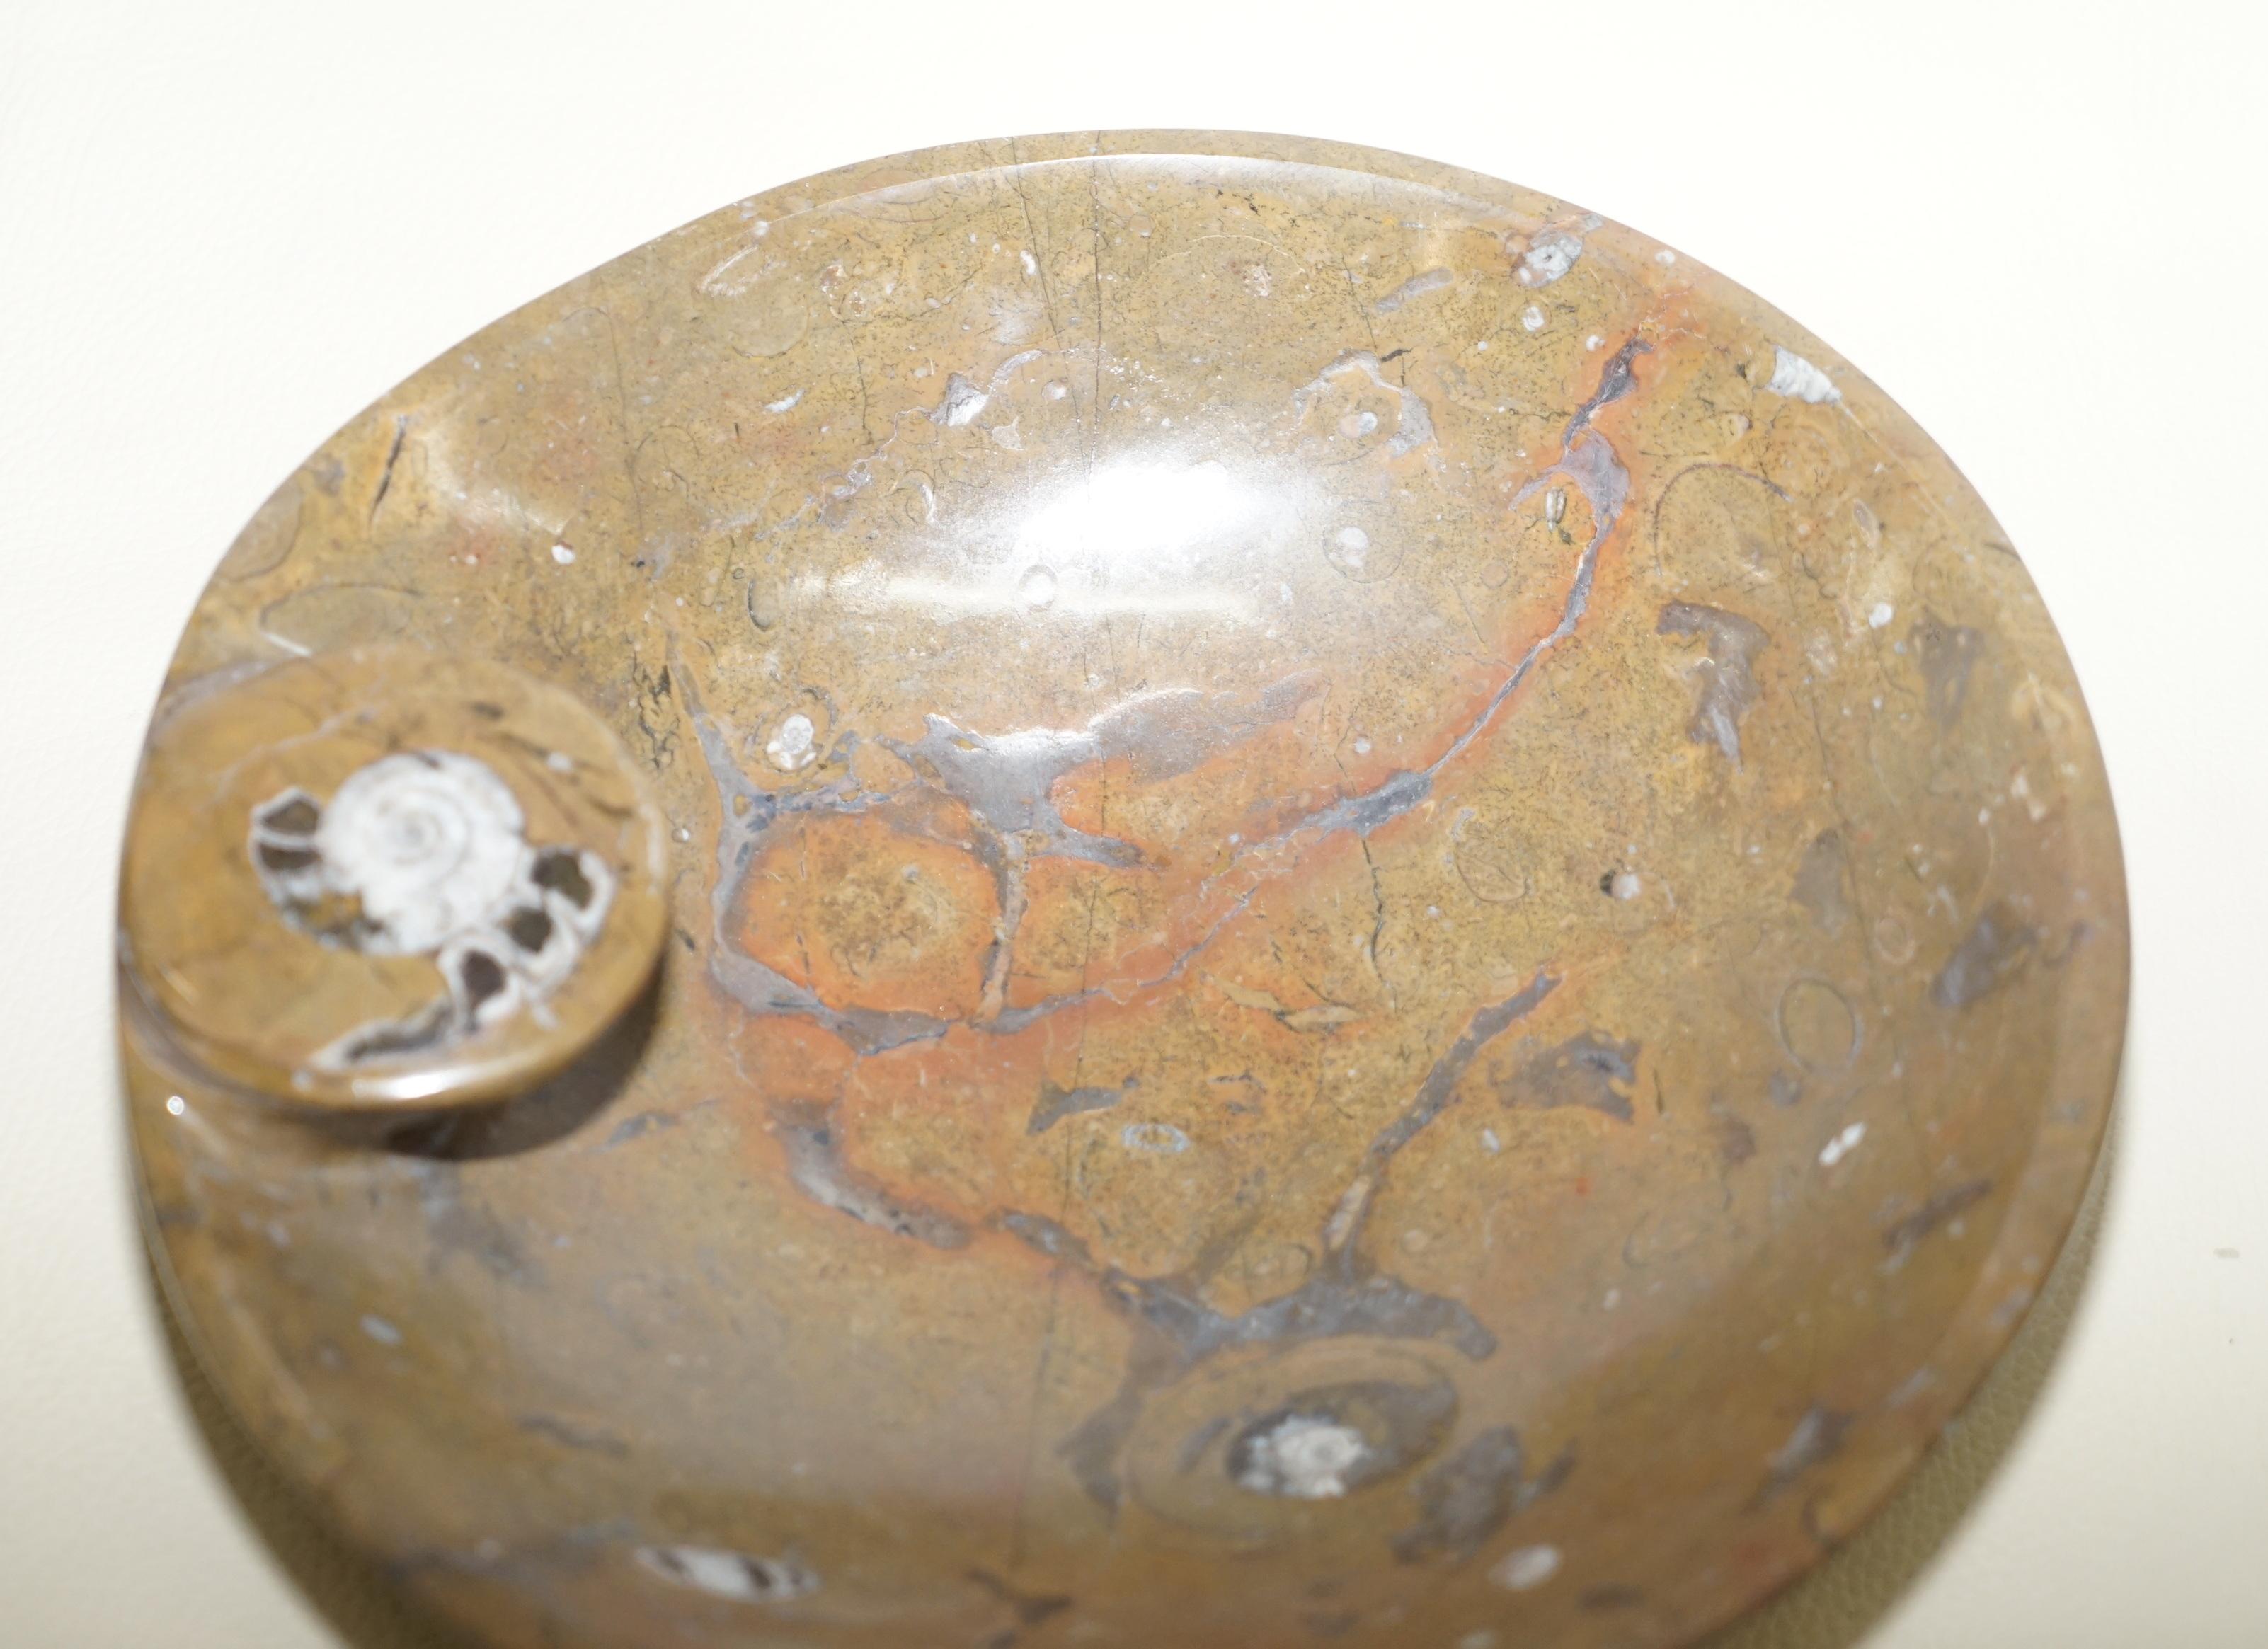 Hand-Crafted 1 of 4 Very Rare Moroccan Ammonite Atlas Mountains Fossil Bowls Marble Finish For Sale